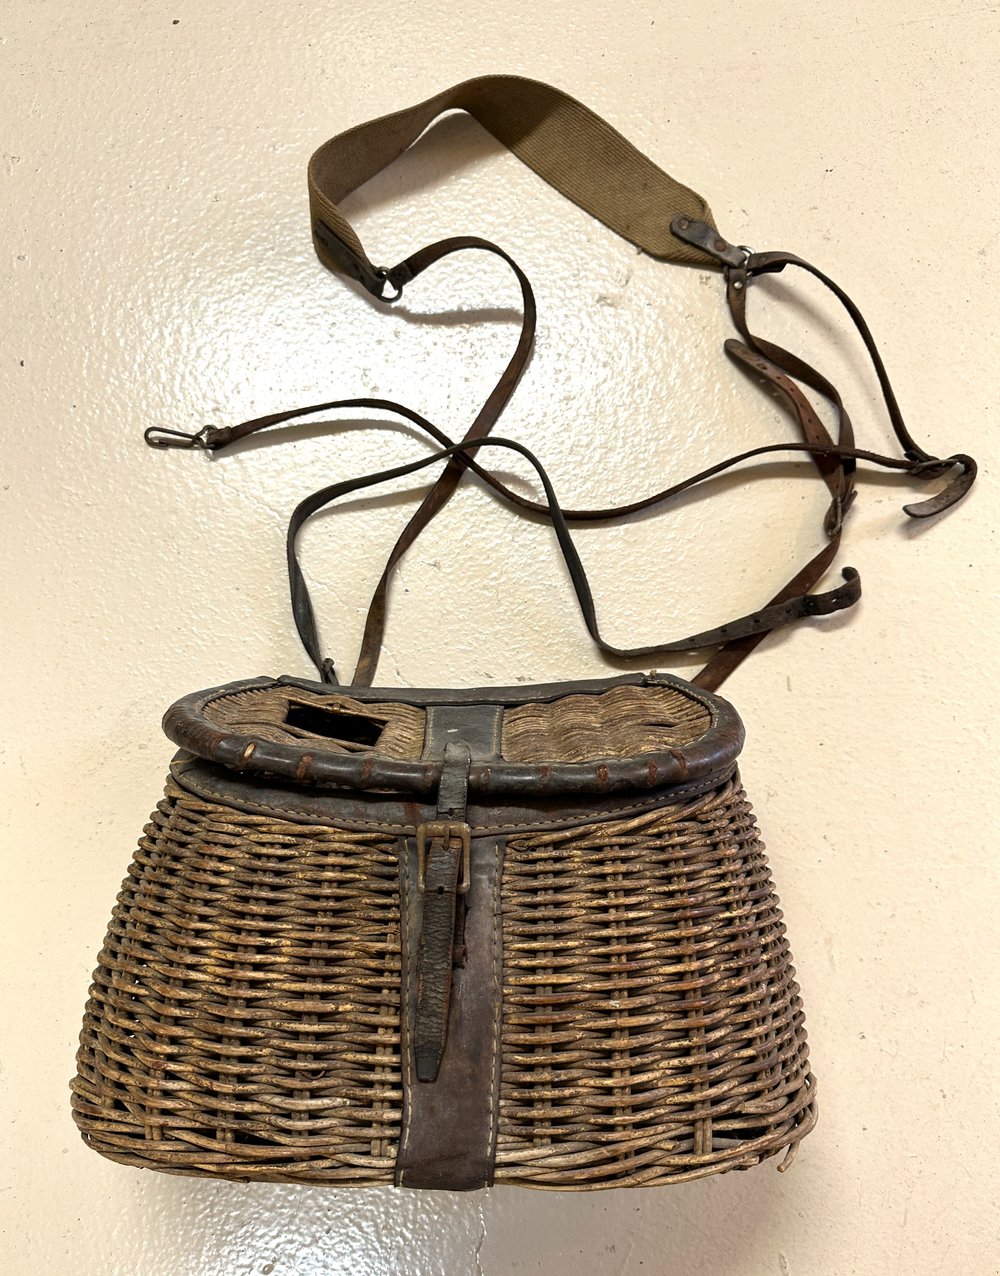 Vintiquewise Wicker Fishing Creel with Faux Leather Shoulder Strap